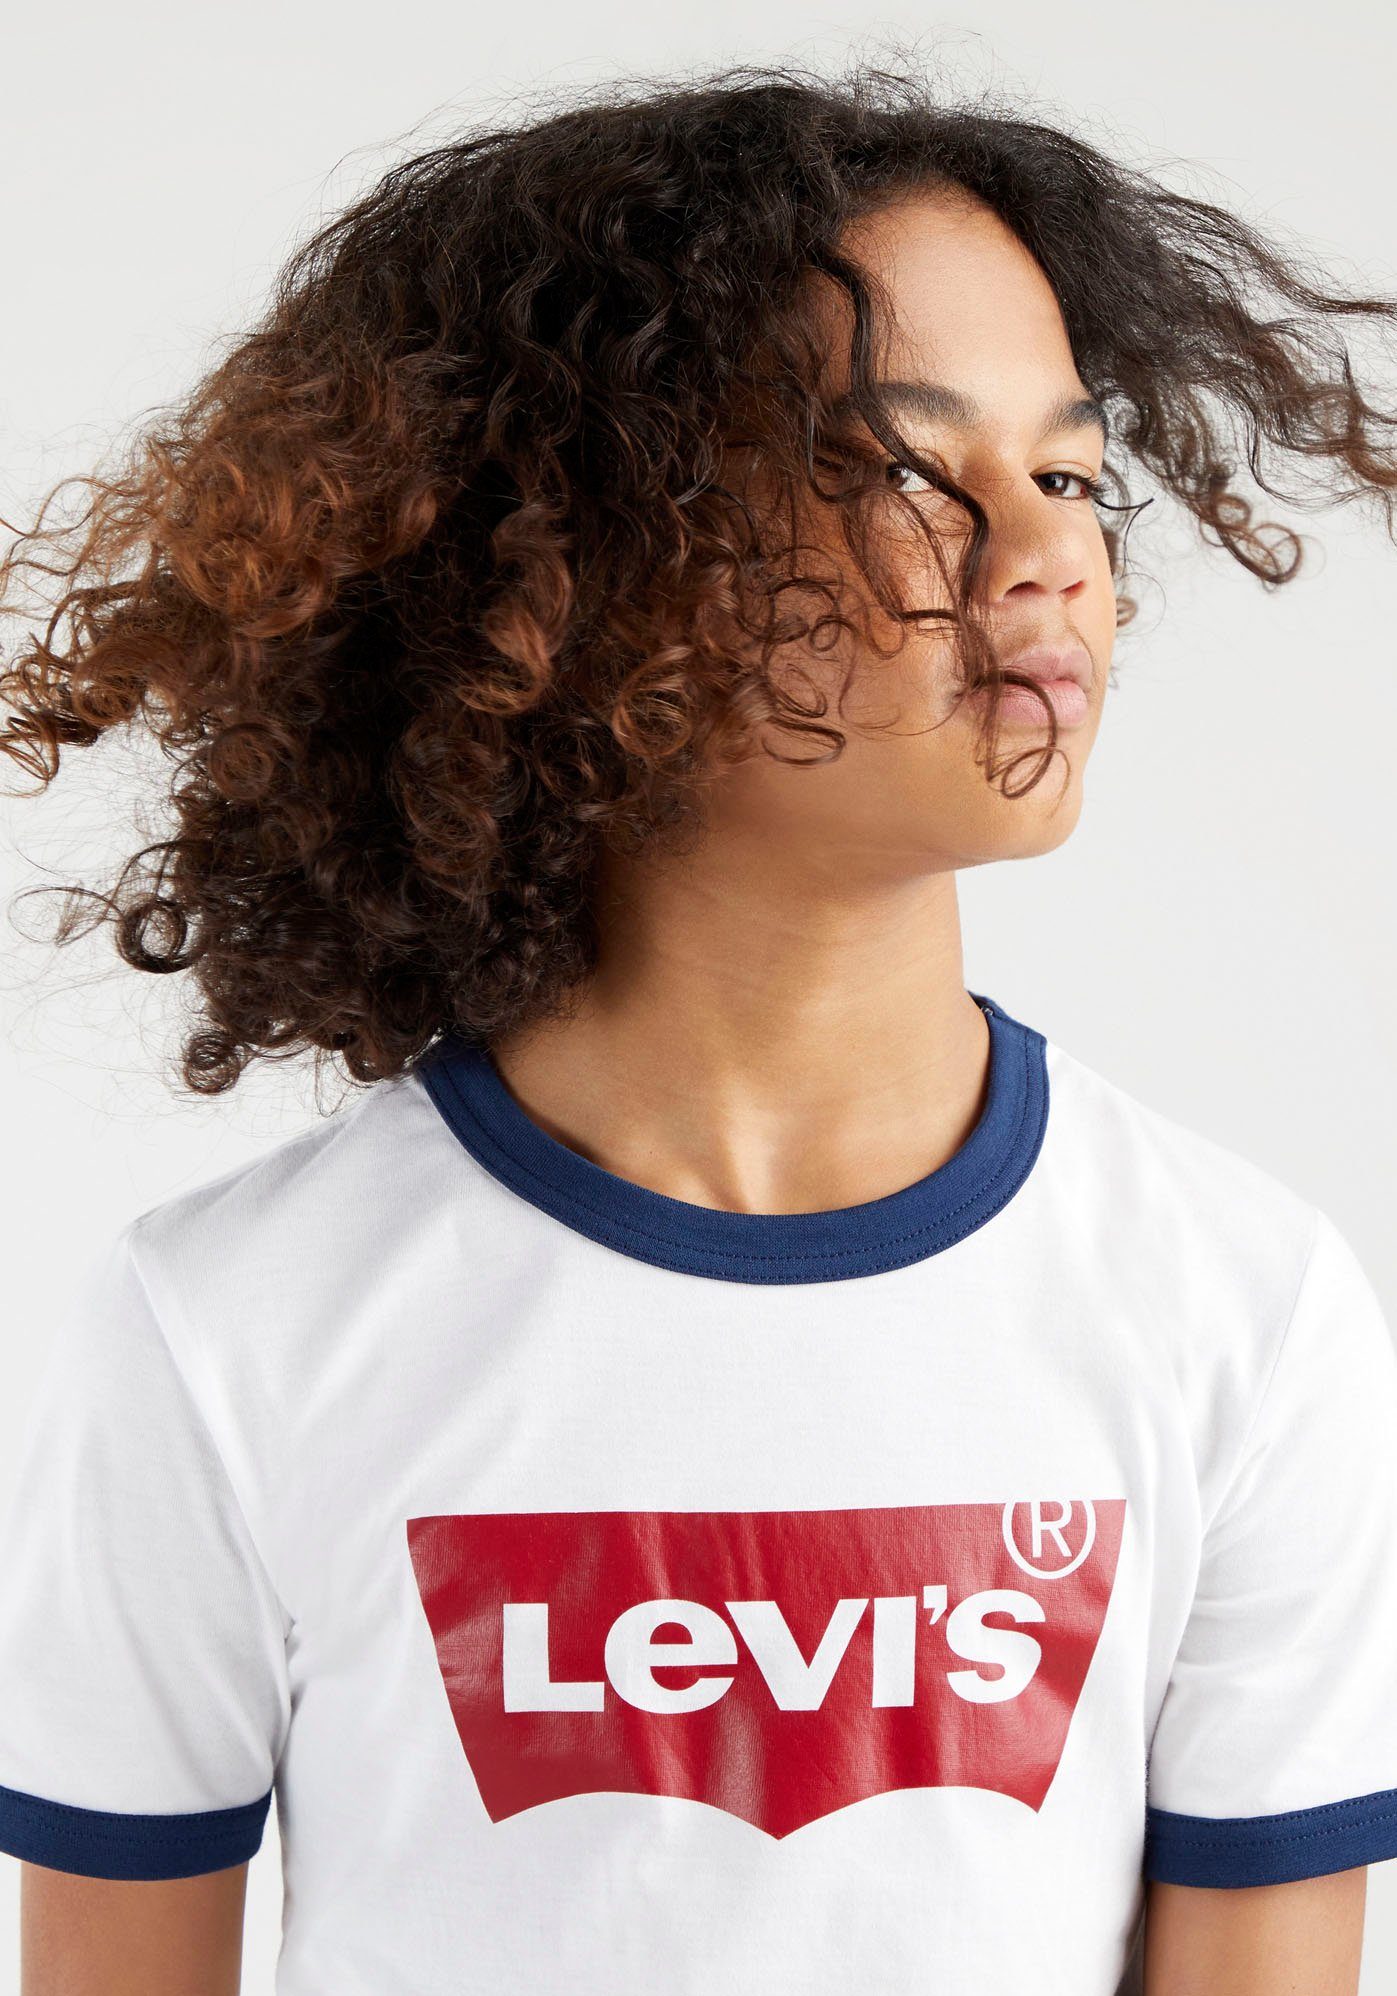 Levi's® TEE BOYS T-Shirt weiß for Kids BATWING RINGER